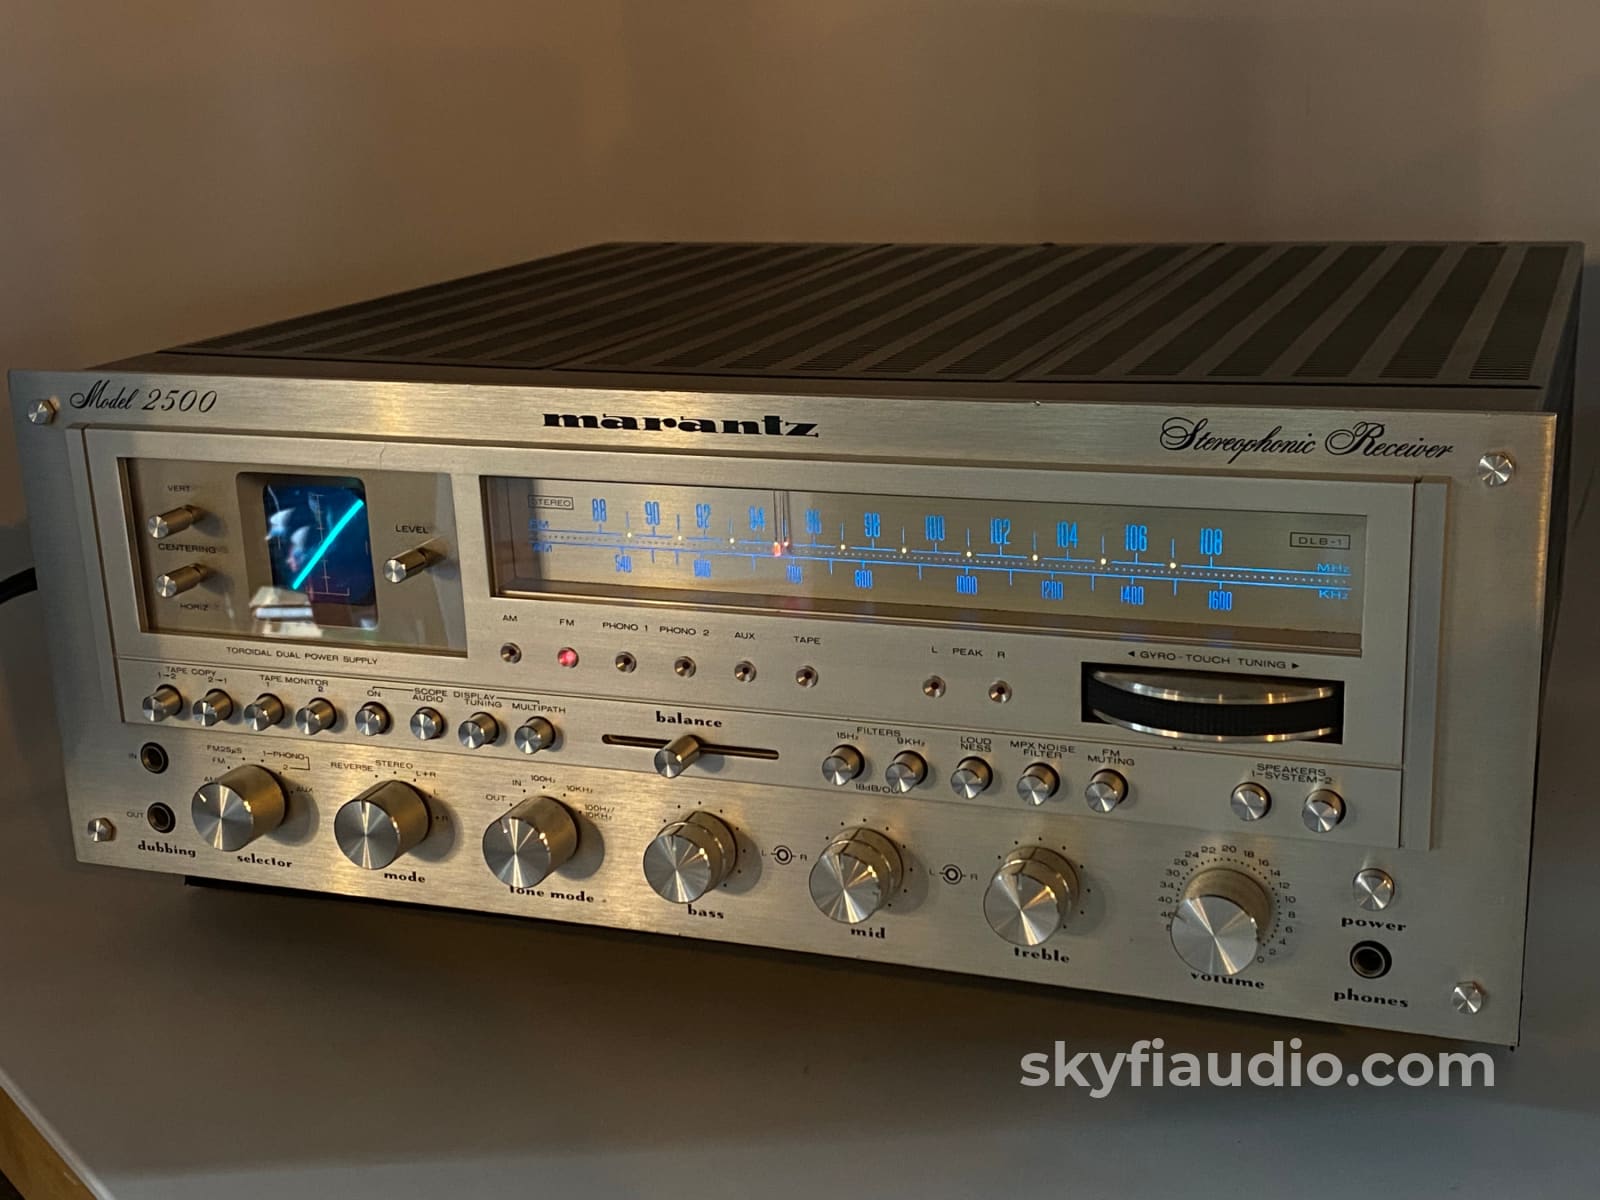 Vintage Marantz Audio Equipment Coveted by Collectors – Robb Report